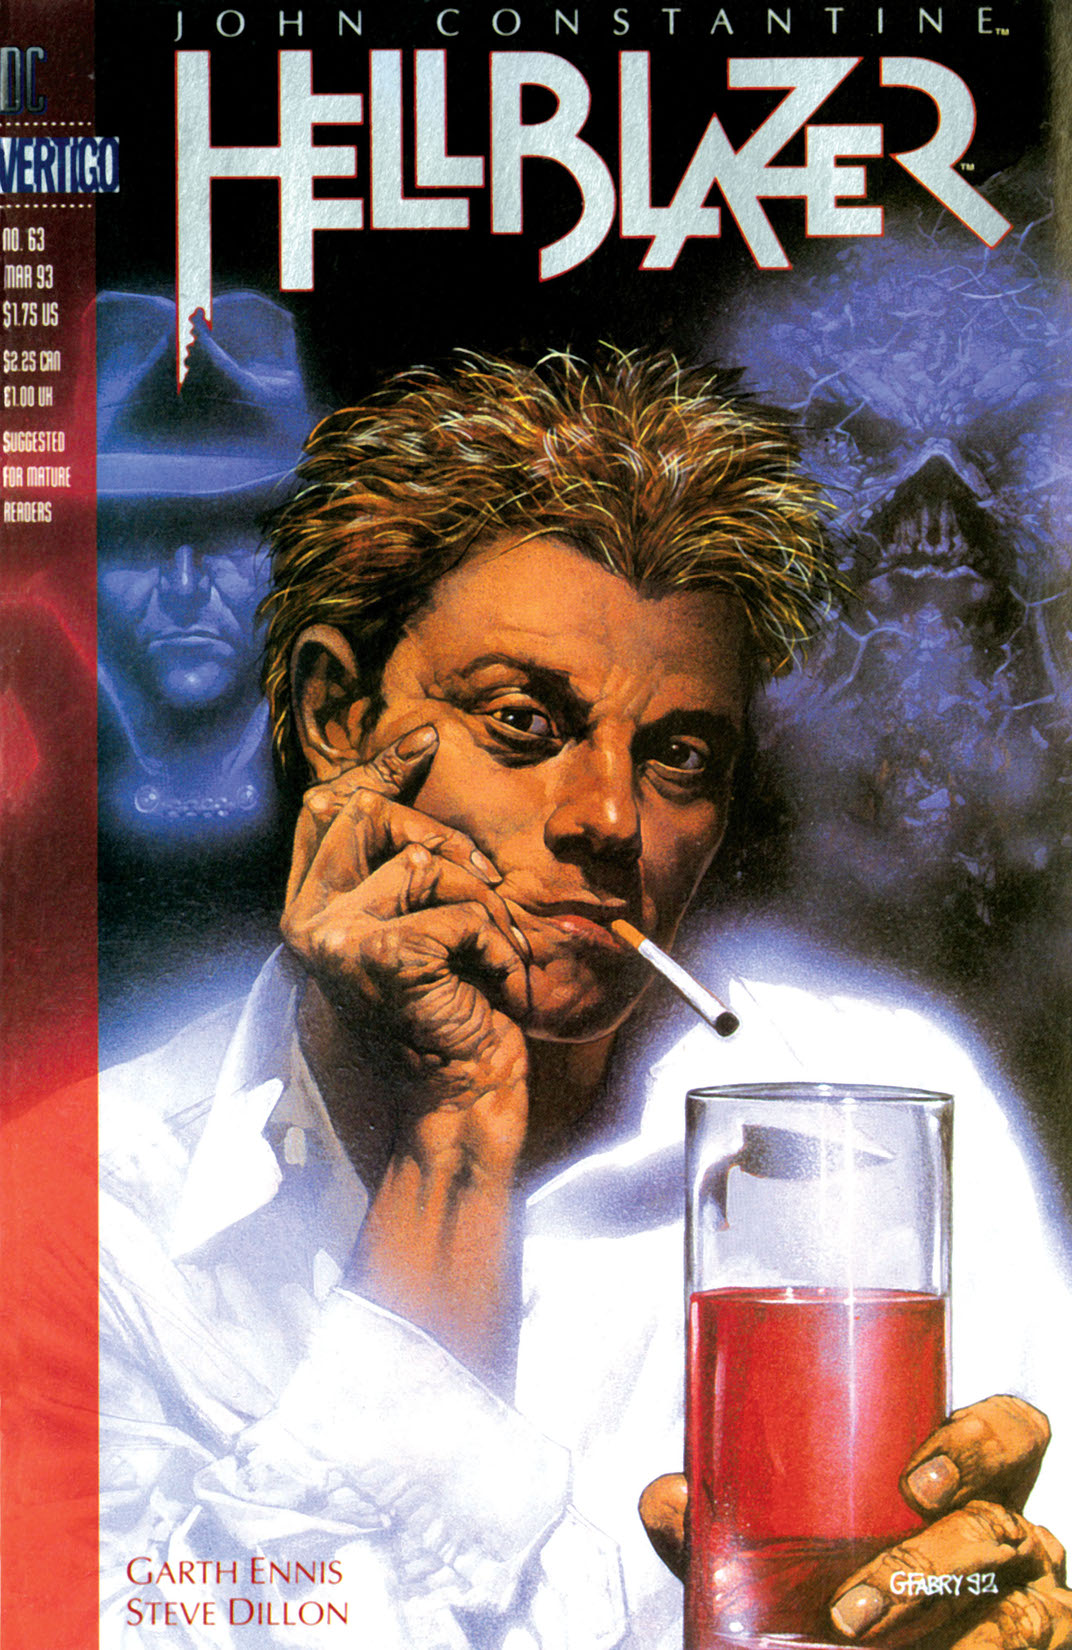 Hellblazer #63 preview images